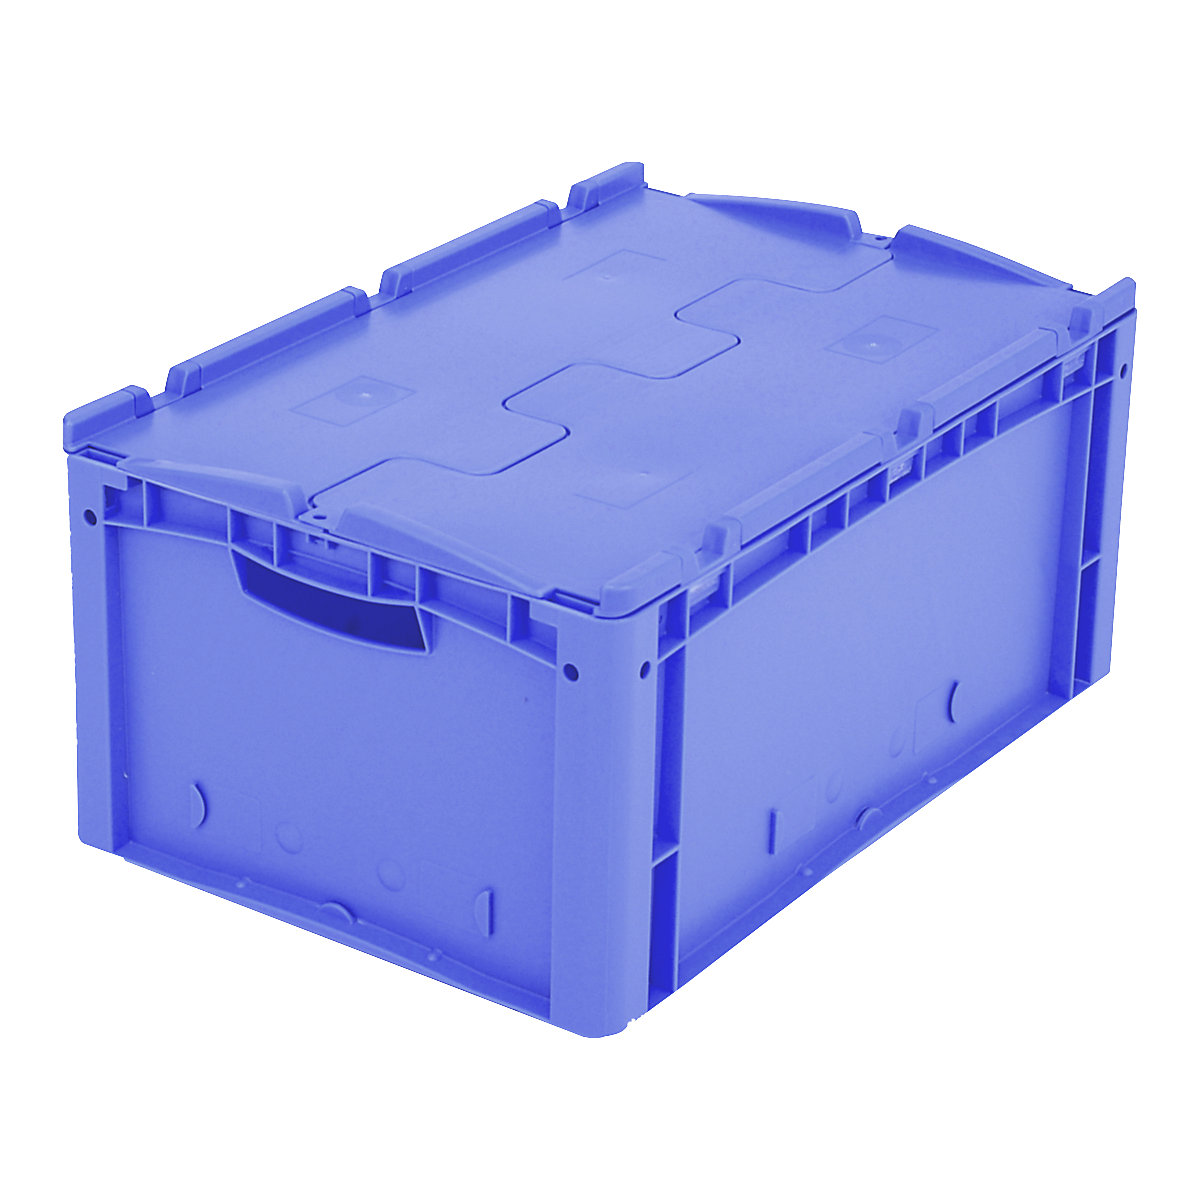 XL Euro stacking container – BITO, with 2-section hinged lid, LxWxH 600 x 400 x 288 mm-4